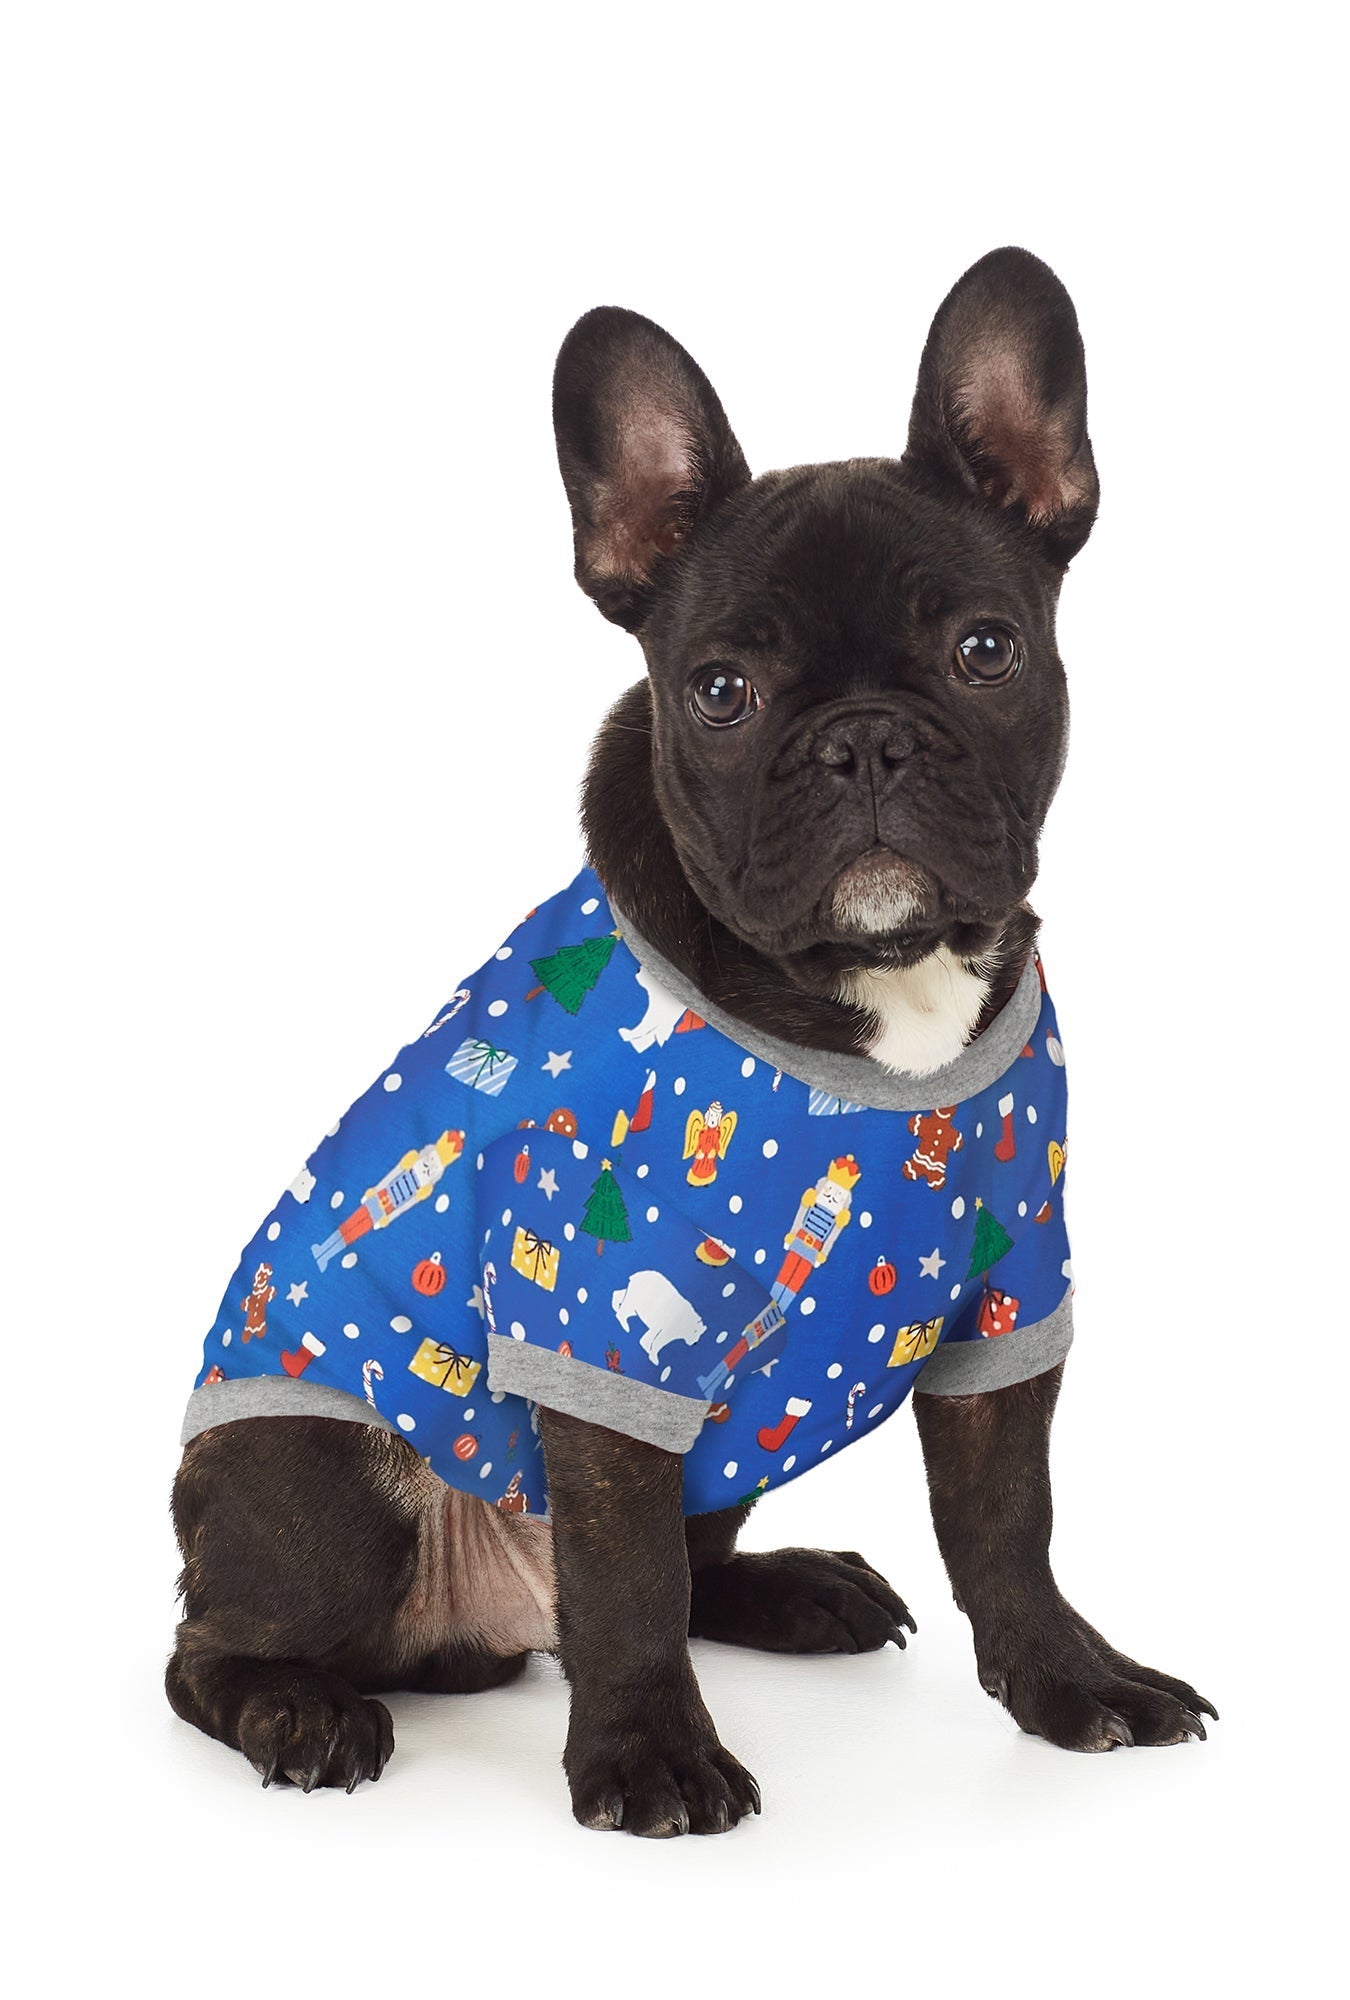 A dog wearing a blue long sleeve pj set with traditions pattern.